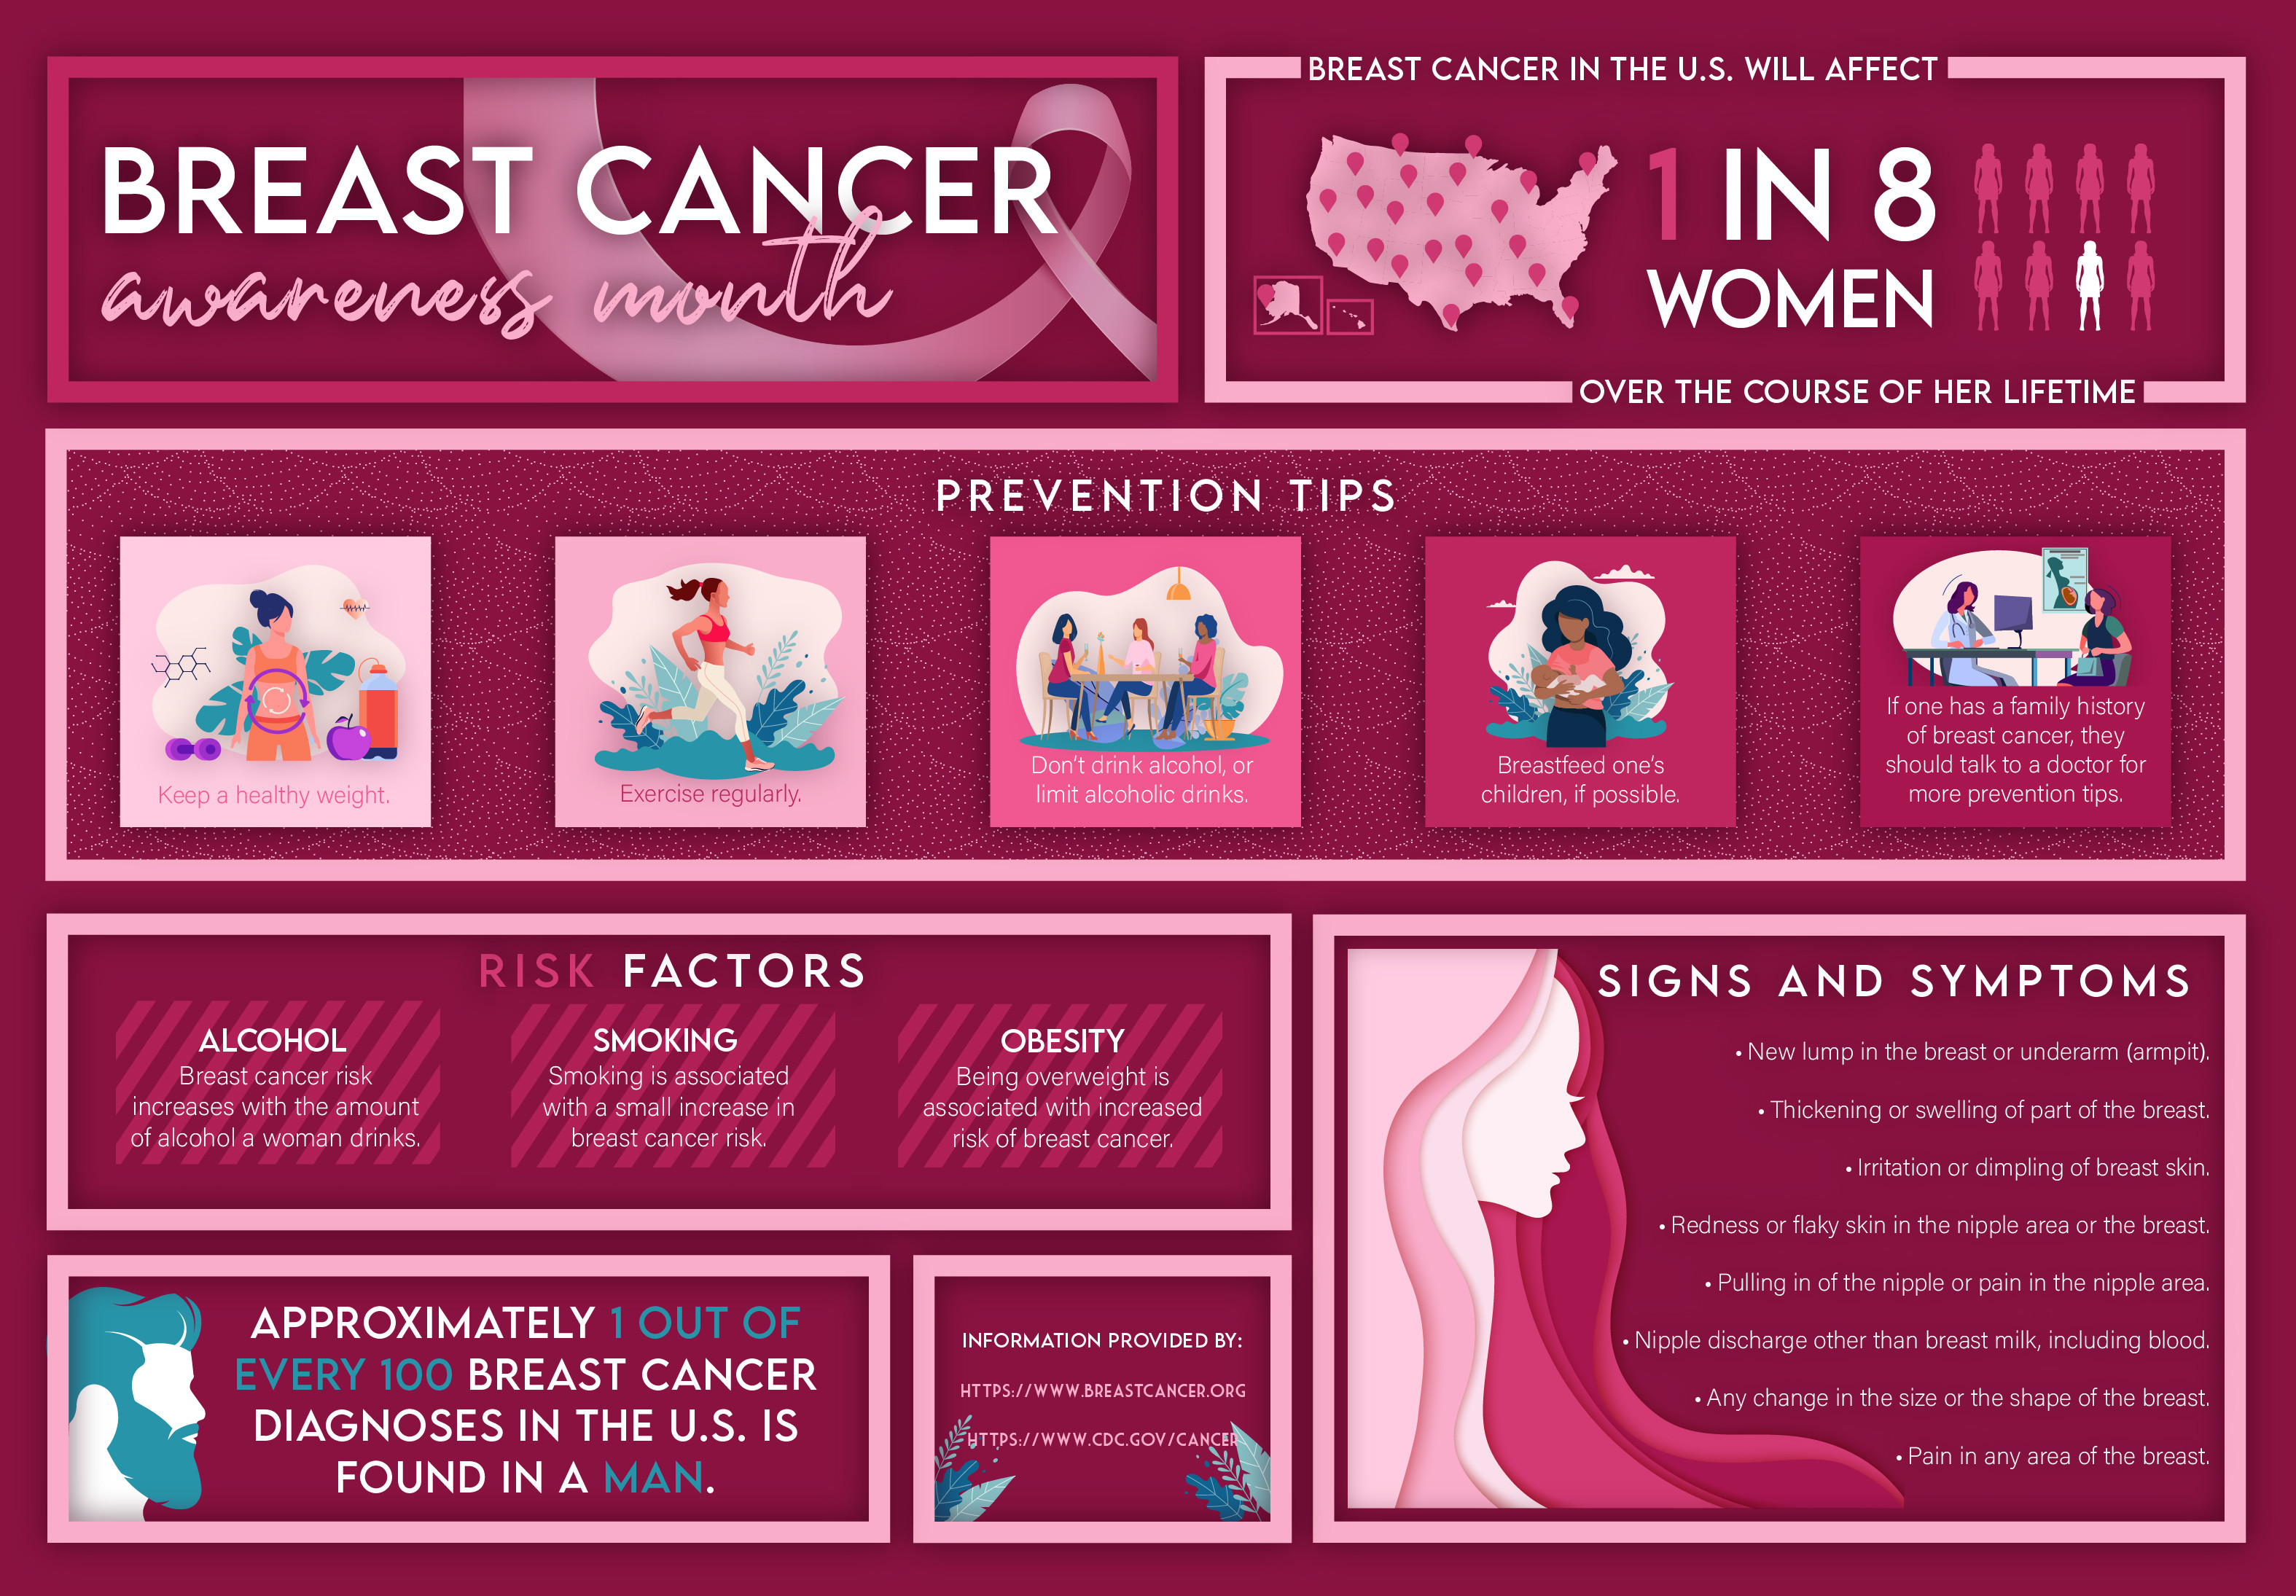 Breast Cancer Awareness Month Encourages Education